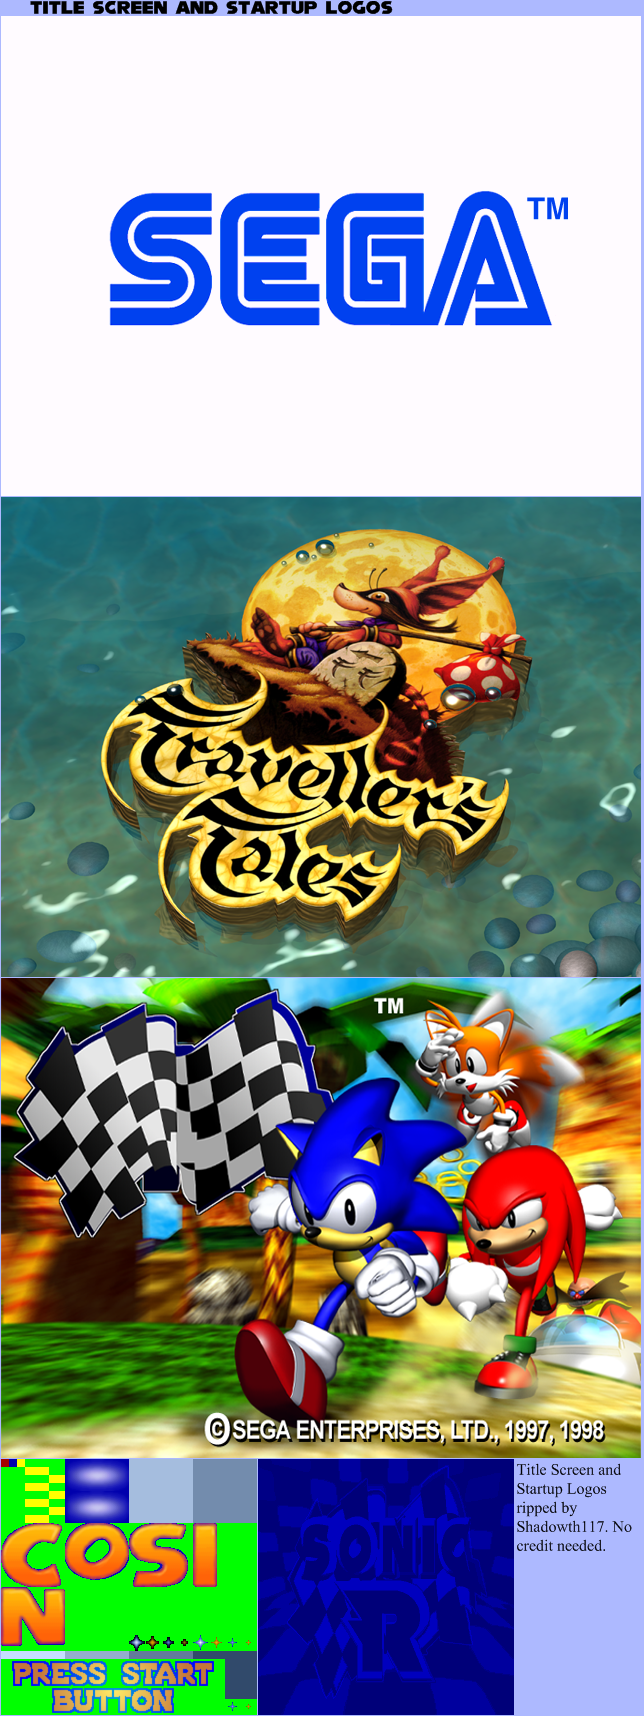 Sonic R - Title Screen and Startup Logos